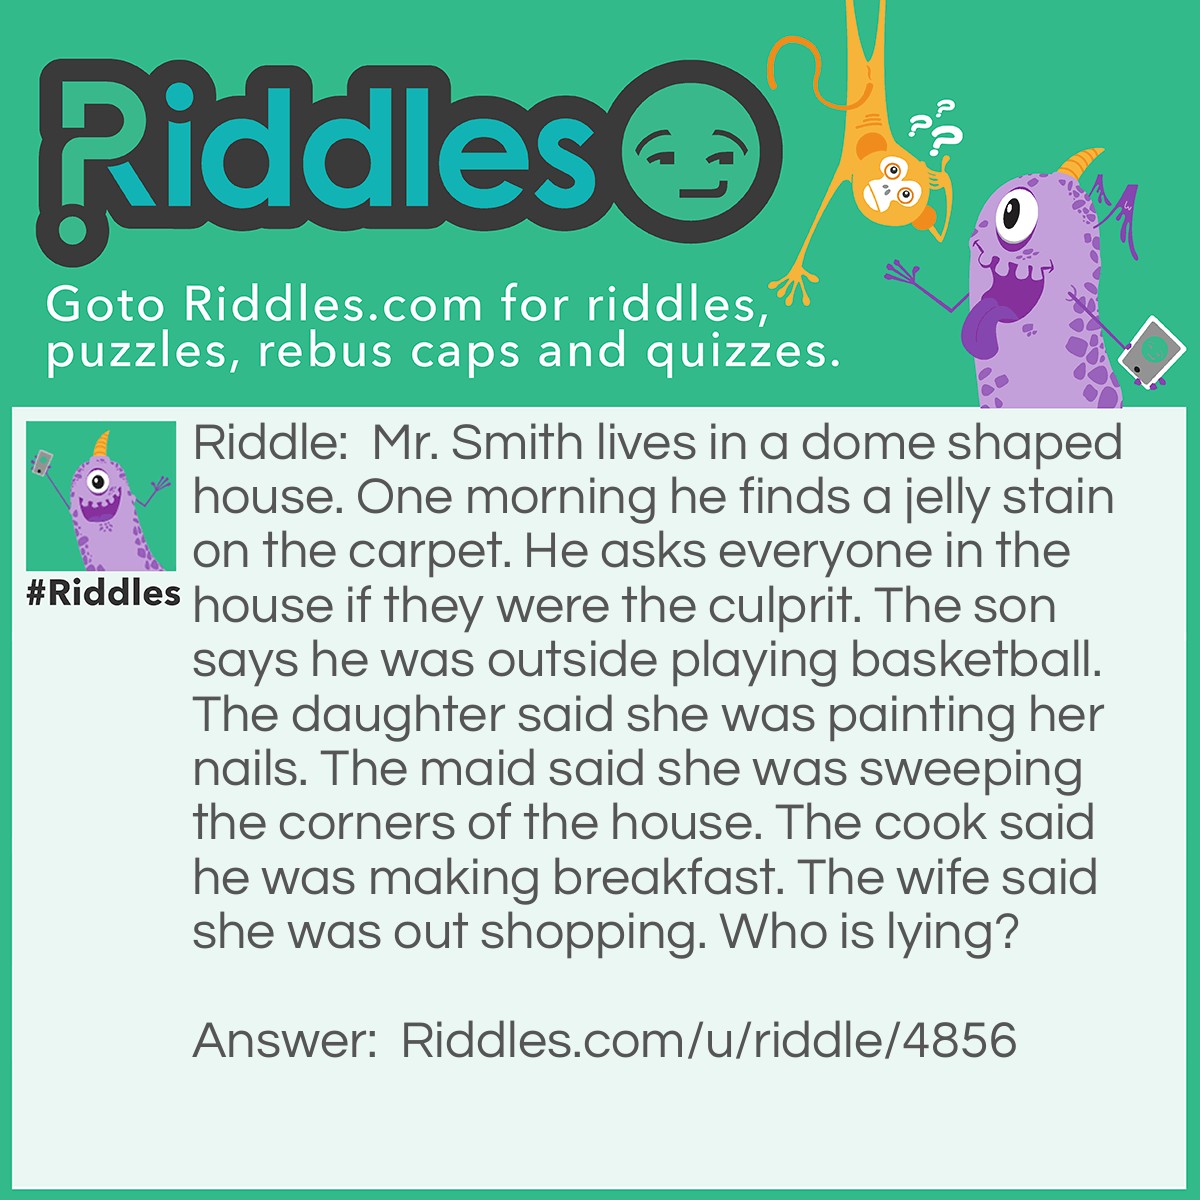 Riddle: Mr. Smith lives in a dome shaped house. One morning he finds a jelly stain on the carpet. He asks everyone in the house if they were the culprit. The son says he was outside playing basketball. The daughter said she was painting her nails. The maid said she was sweeping the corners of the house. The cook said he was making breakfast. The wife said she was out shopping. Who is lying? Answer: The maid. She cannot sweep the corners of the house, it is a dome shaped house.